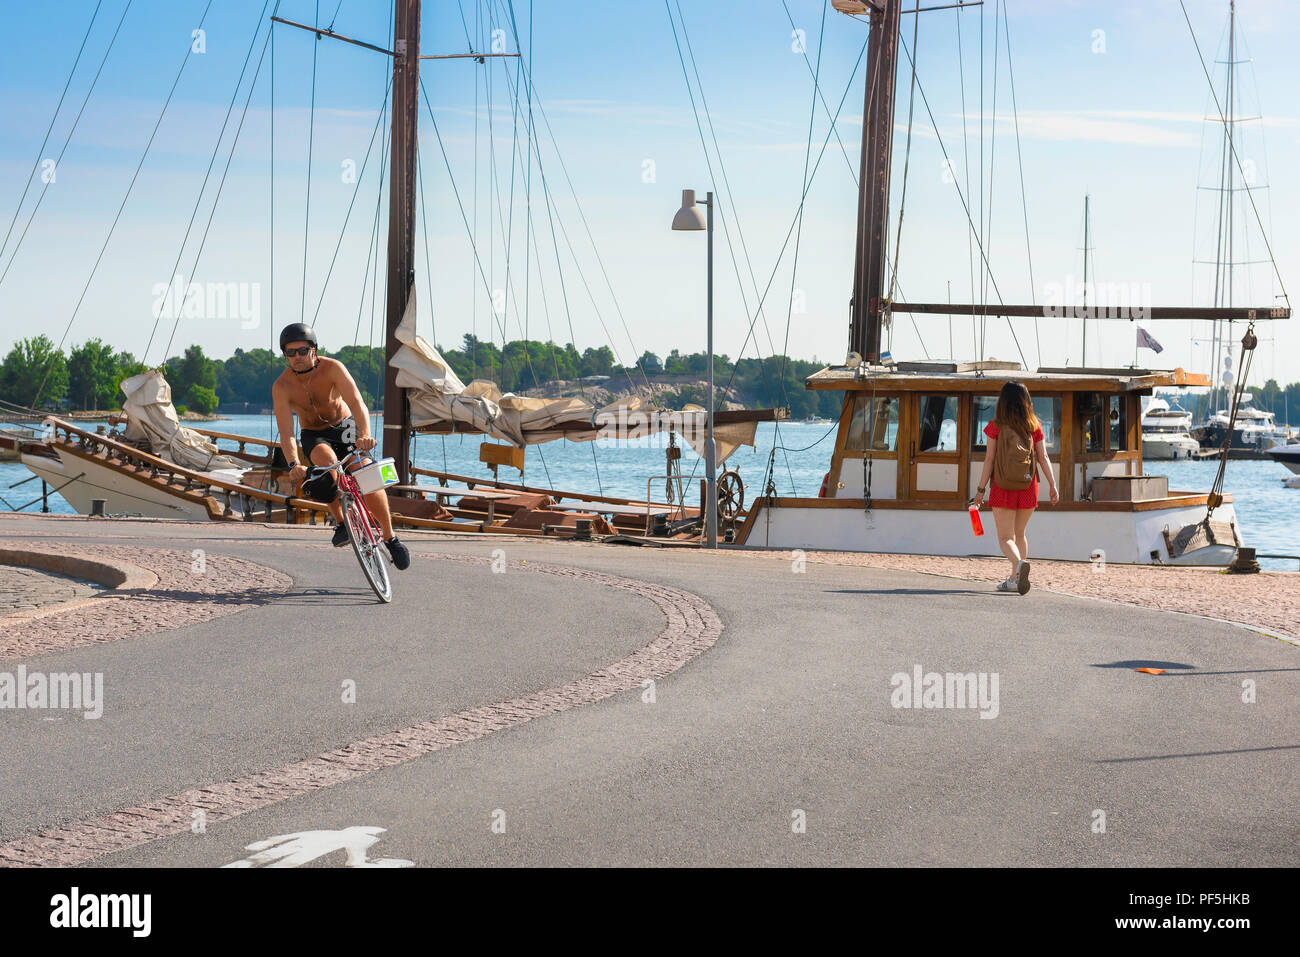 Helsinki Finland summer, view on a summer morning of a young man on a bike cycling on a cycle path along the quayside in Helsinki harbor, Finland. Stock Photo